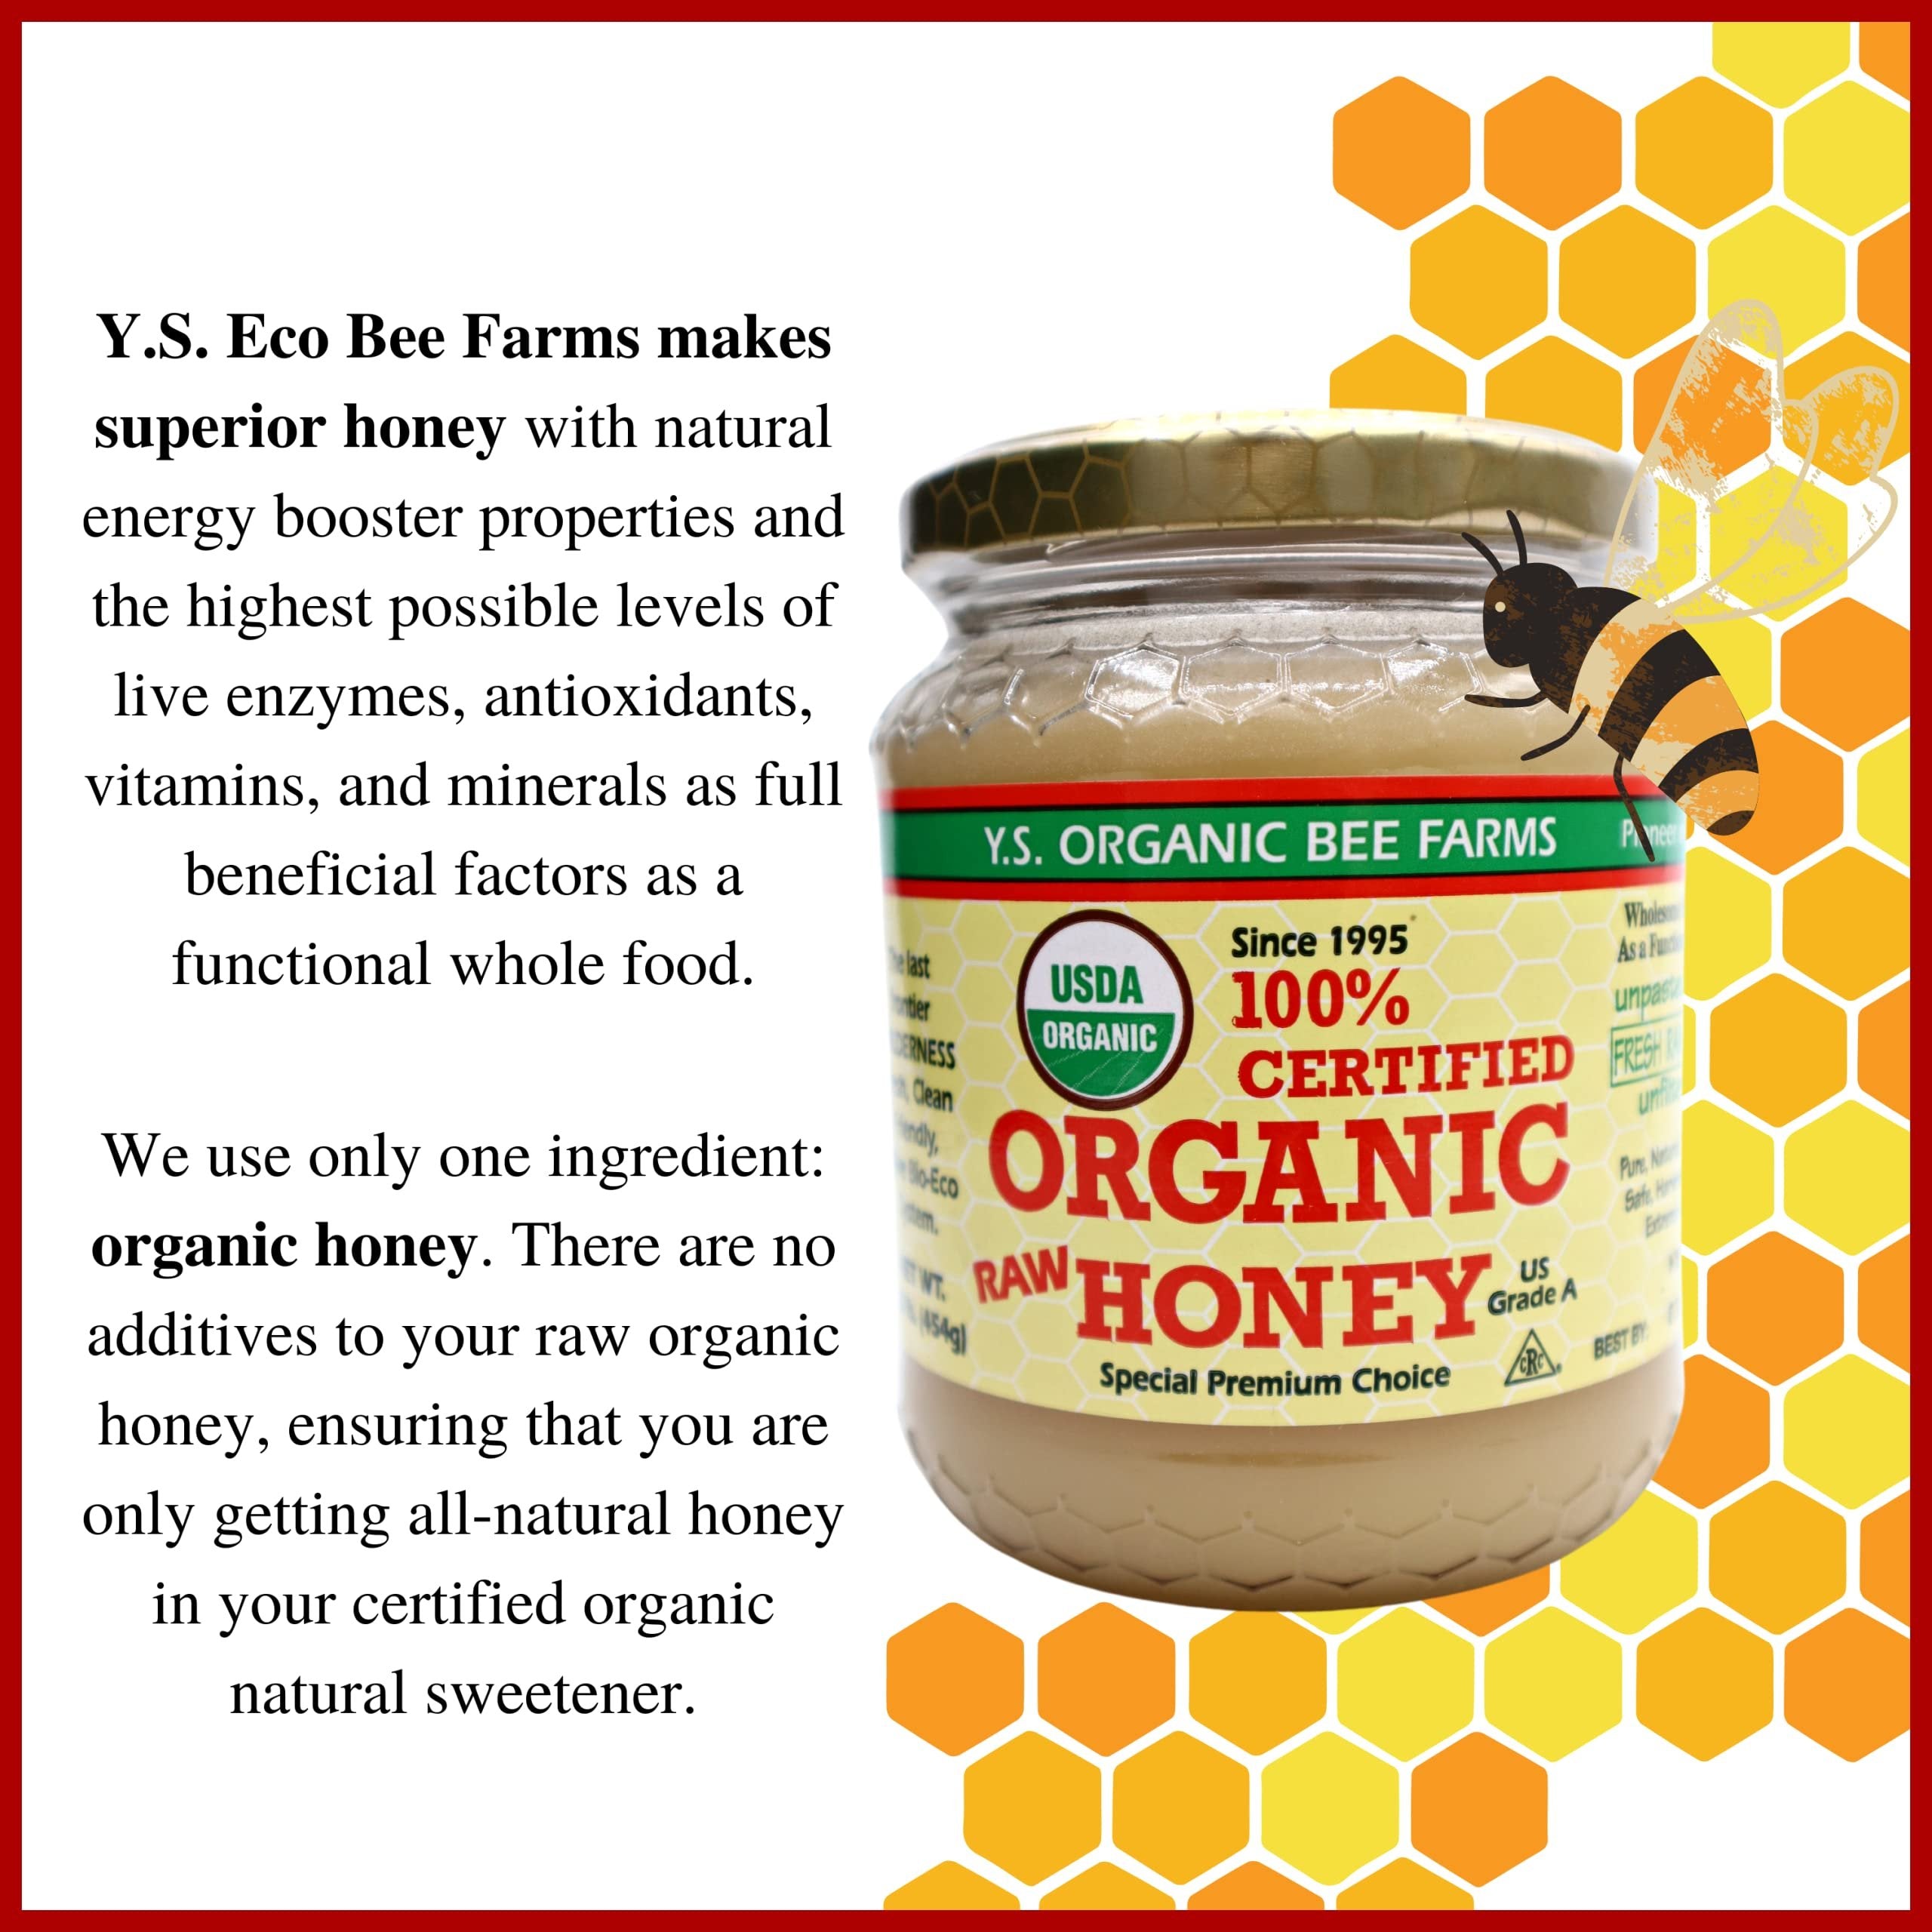 Y.S. Organic Bee Farms 100% Certified Y.S. Organic Raw Honey - Unpasteurized, Unfiltered, Pure Natural Honey - Gluten Free Organic Food and Natural Sweetener - 1 Lb Honey Jar with Bonus Key Chain